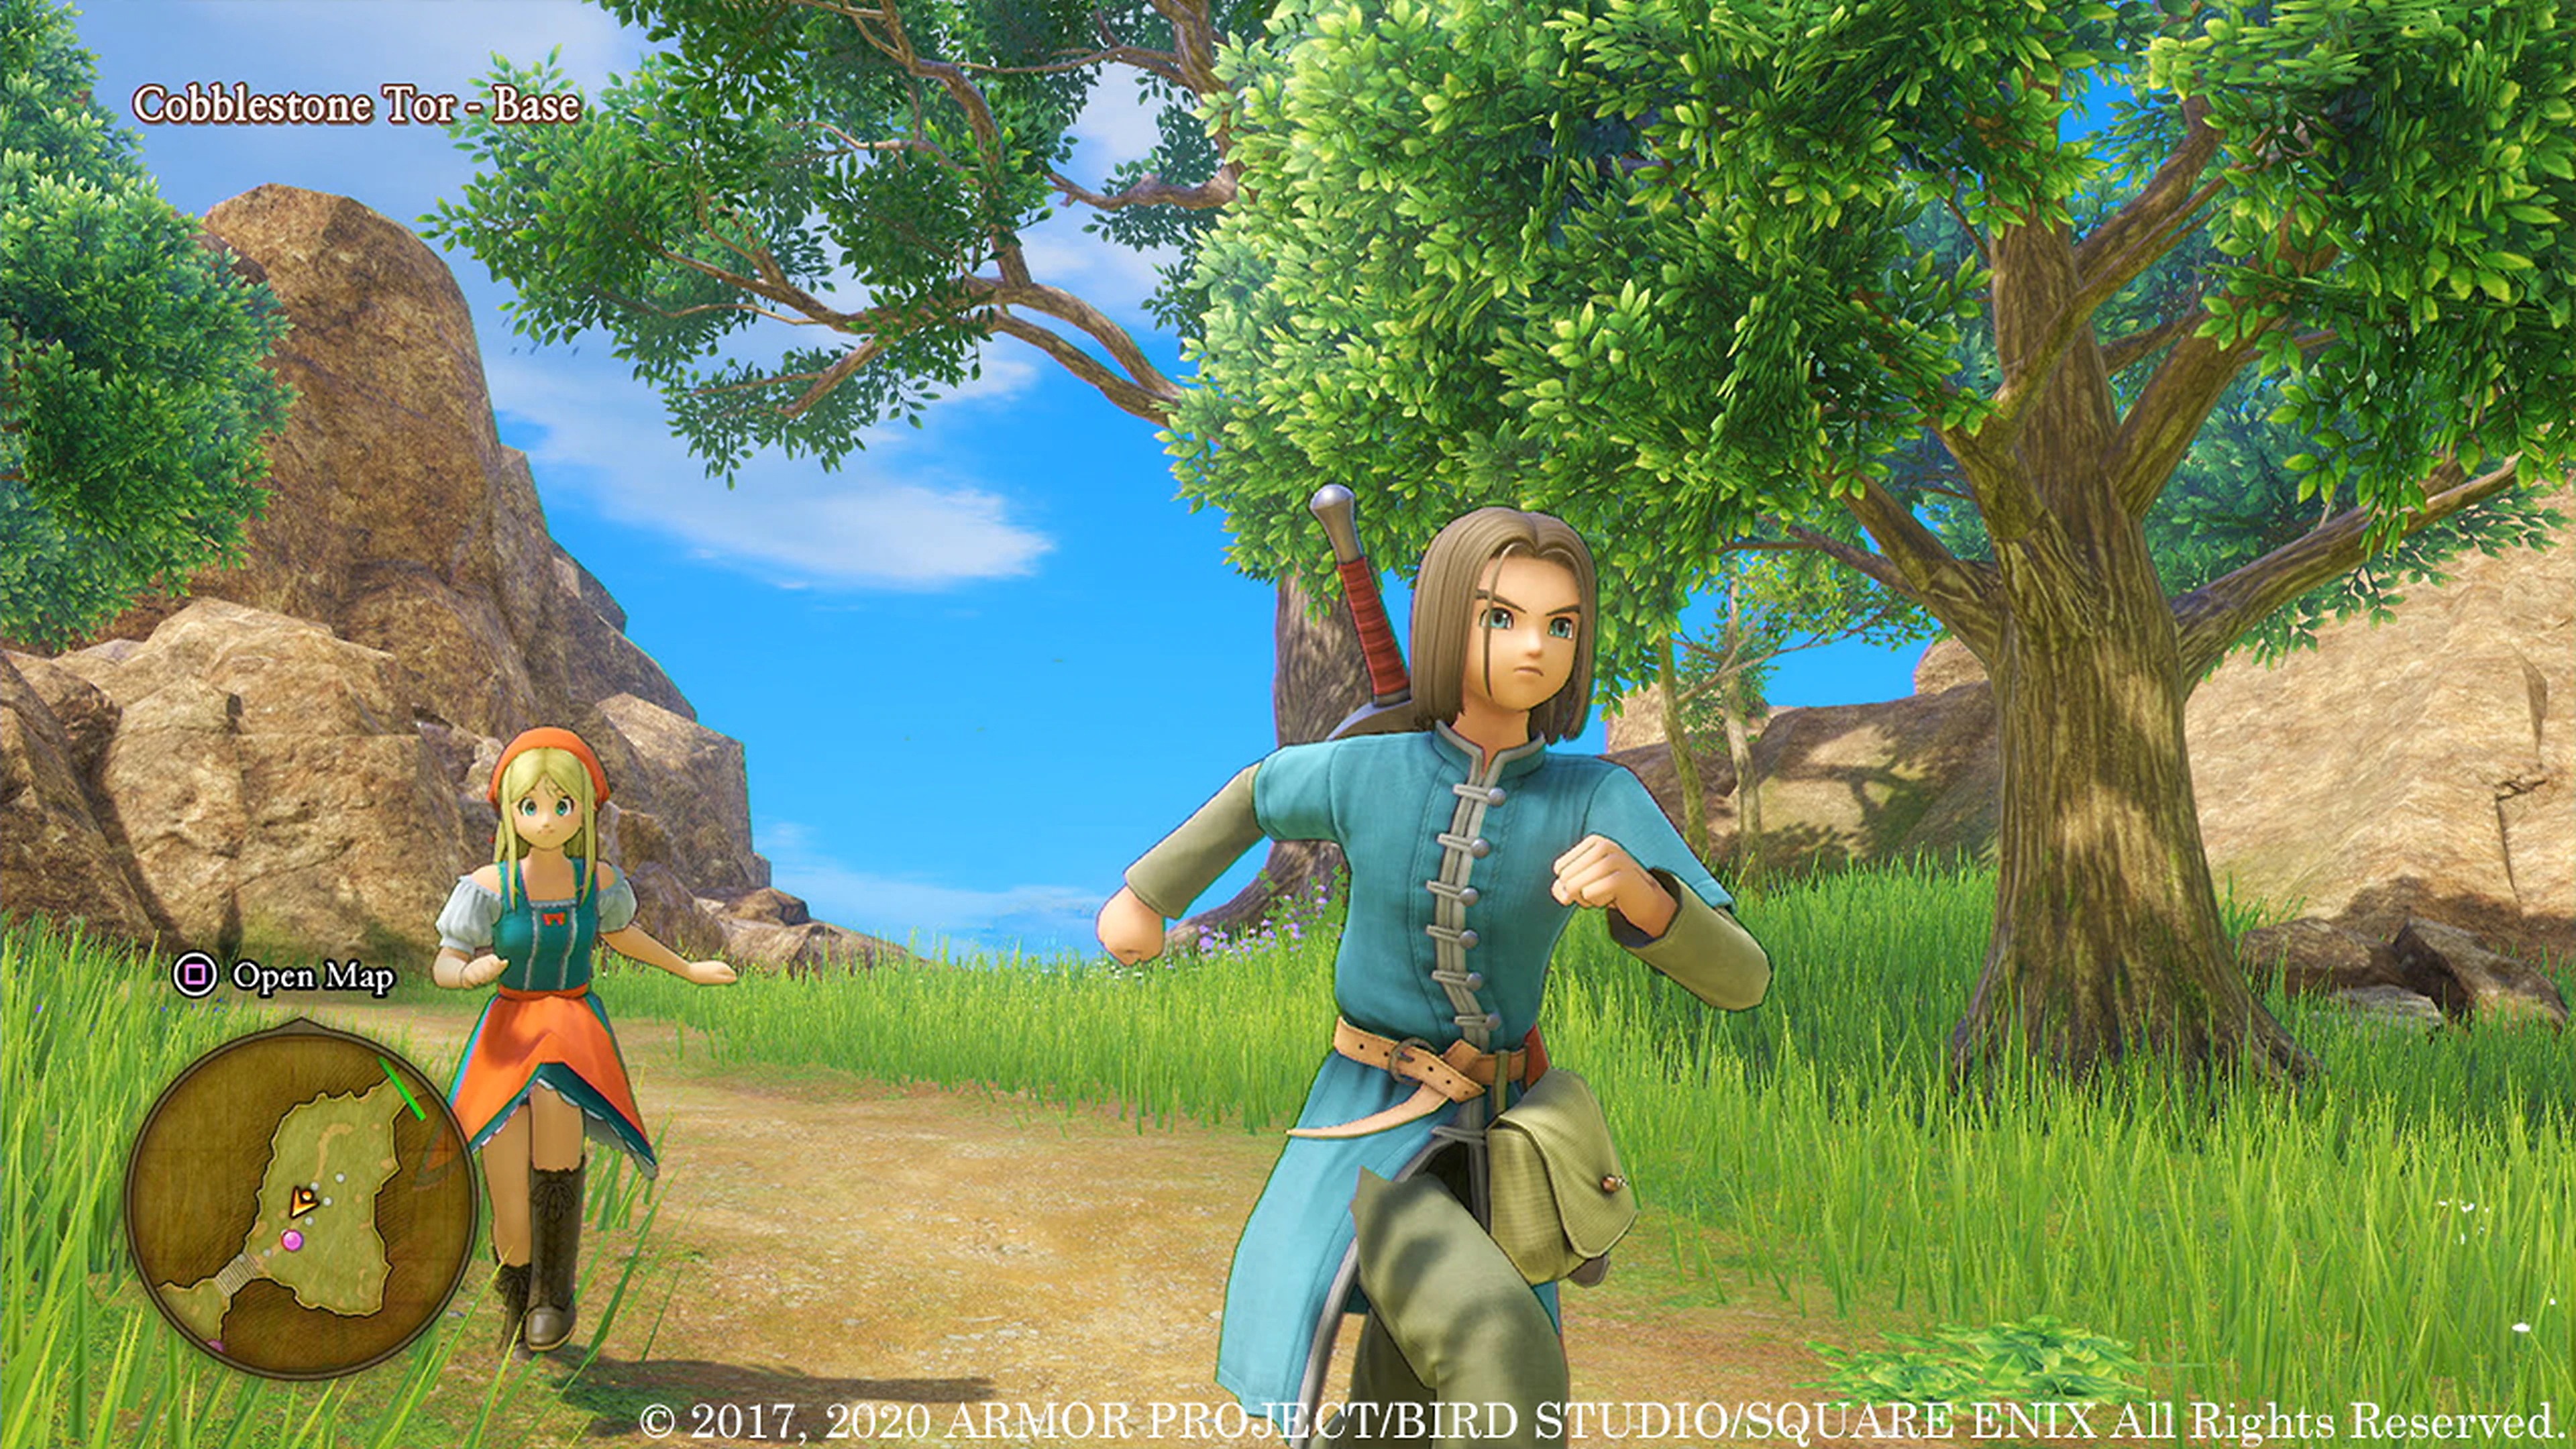 Dragon Quest XI: Echoes of an Elusive Age Gallery Screenshot 4